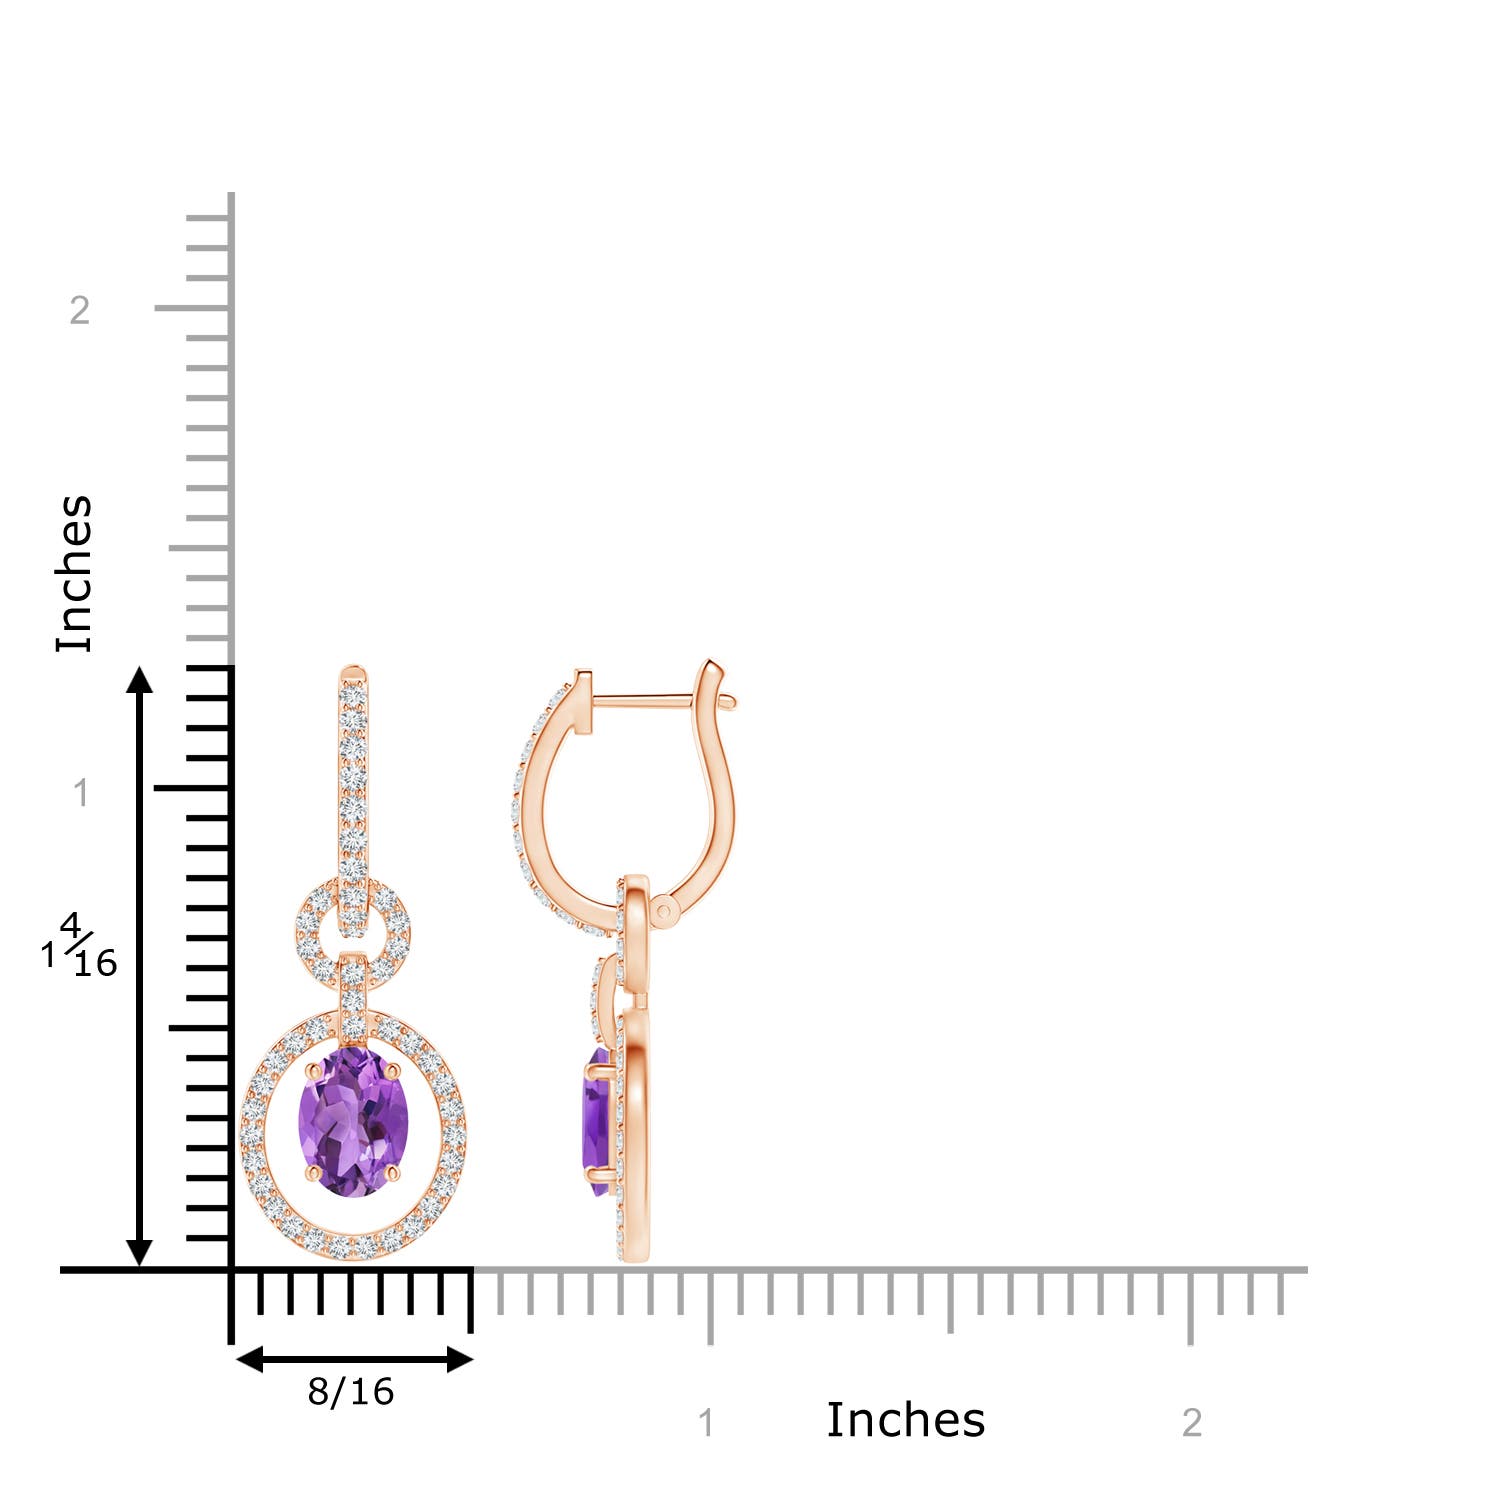 AA - Amethyst / 2.02 CT / 14 KT Rose Gold